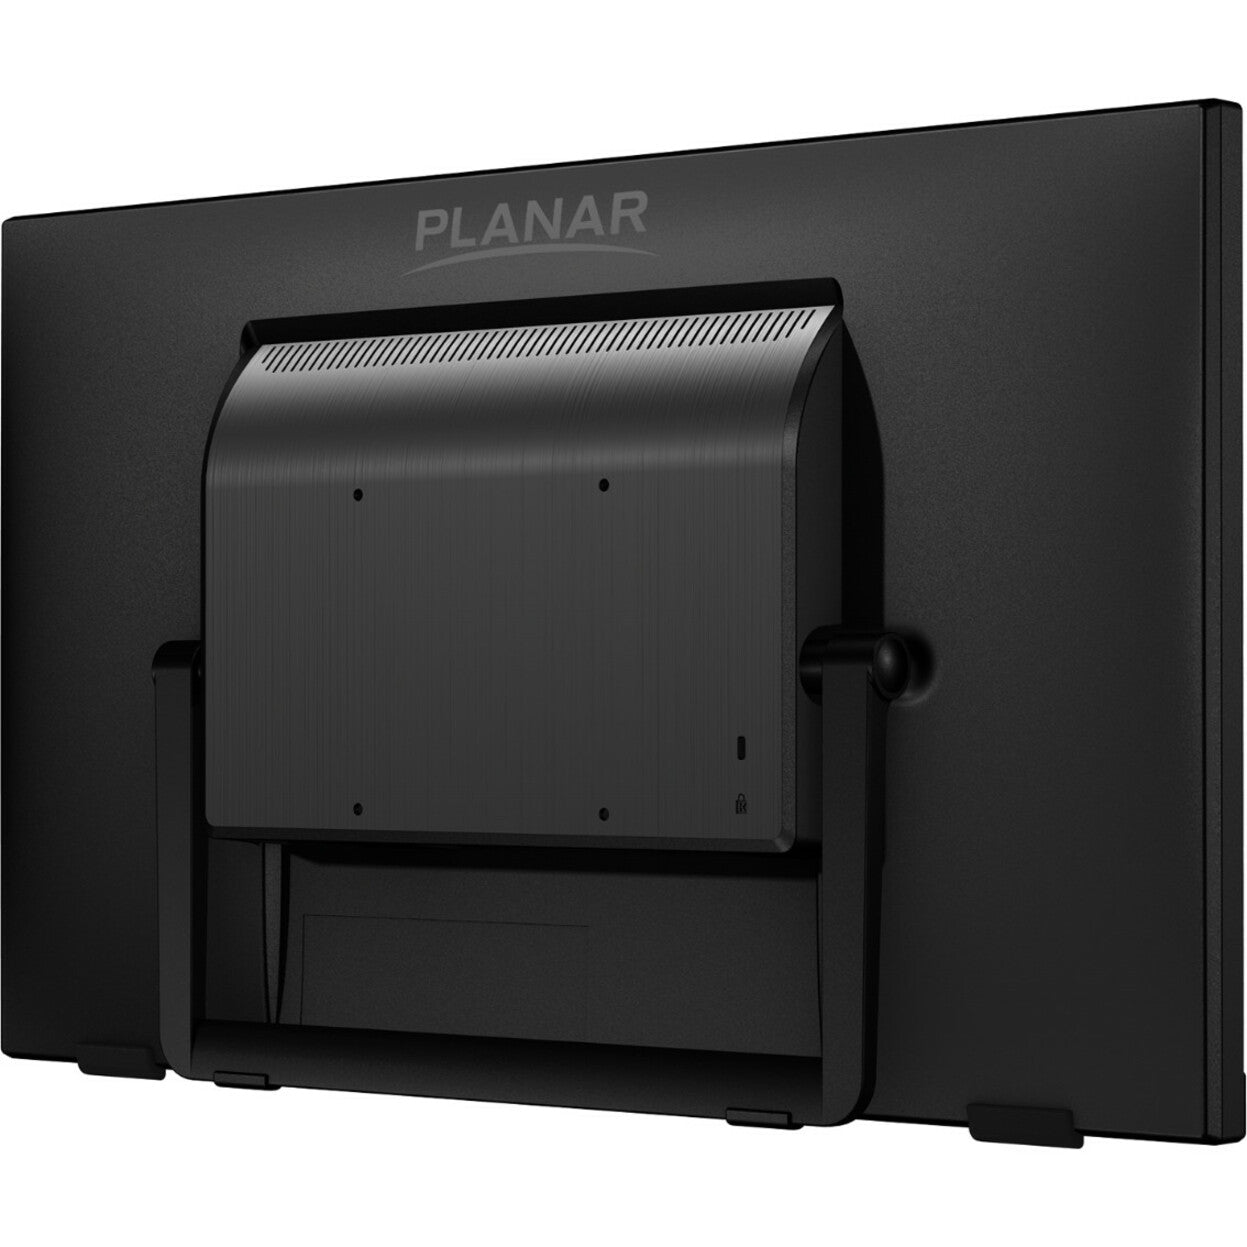 Planar 997-8286-00 PCT2235 22" Touch Screen Monitor, Full HD, Multi-Touch, Edge-Lit, Black